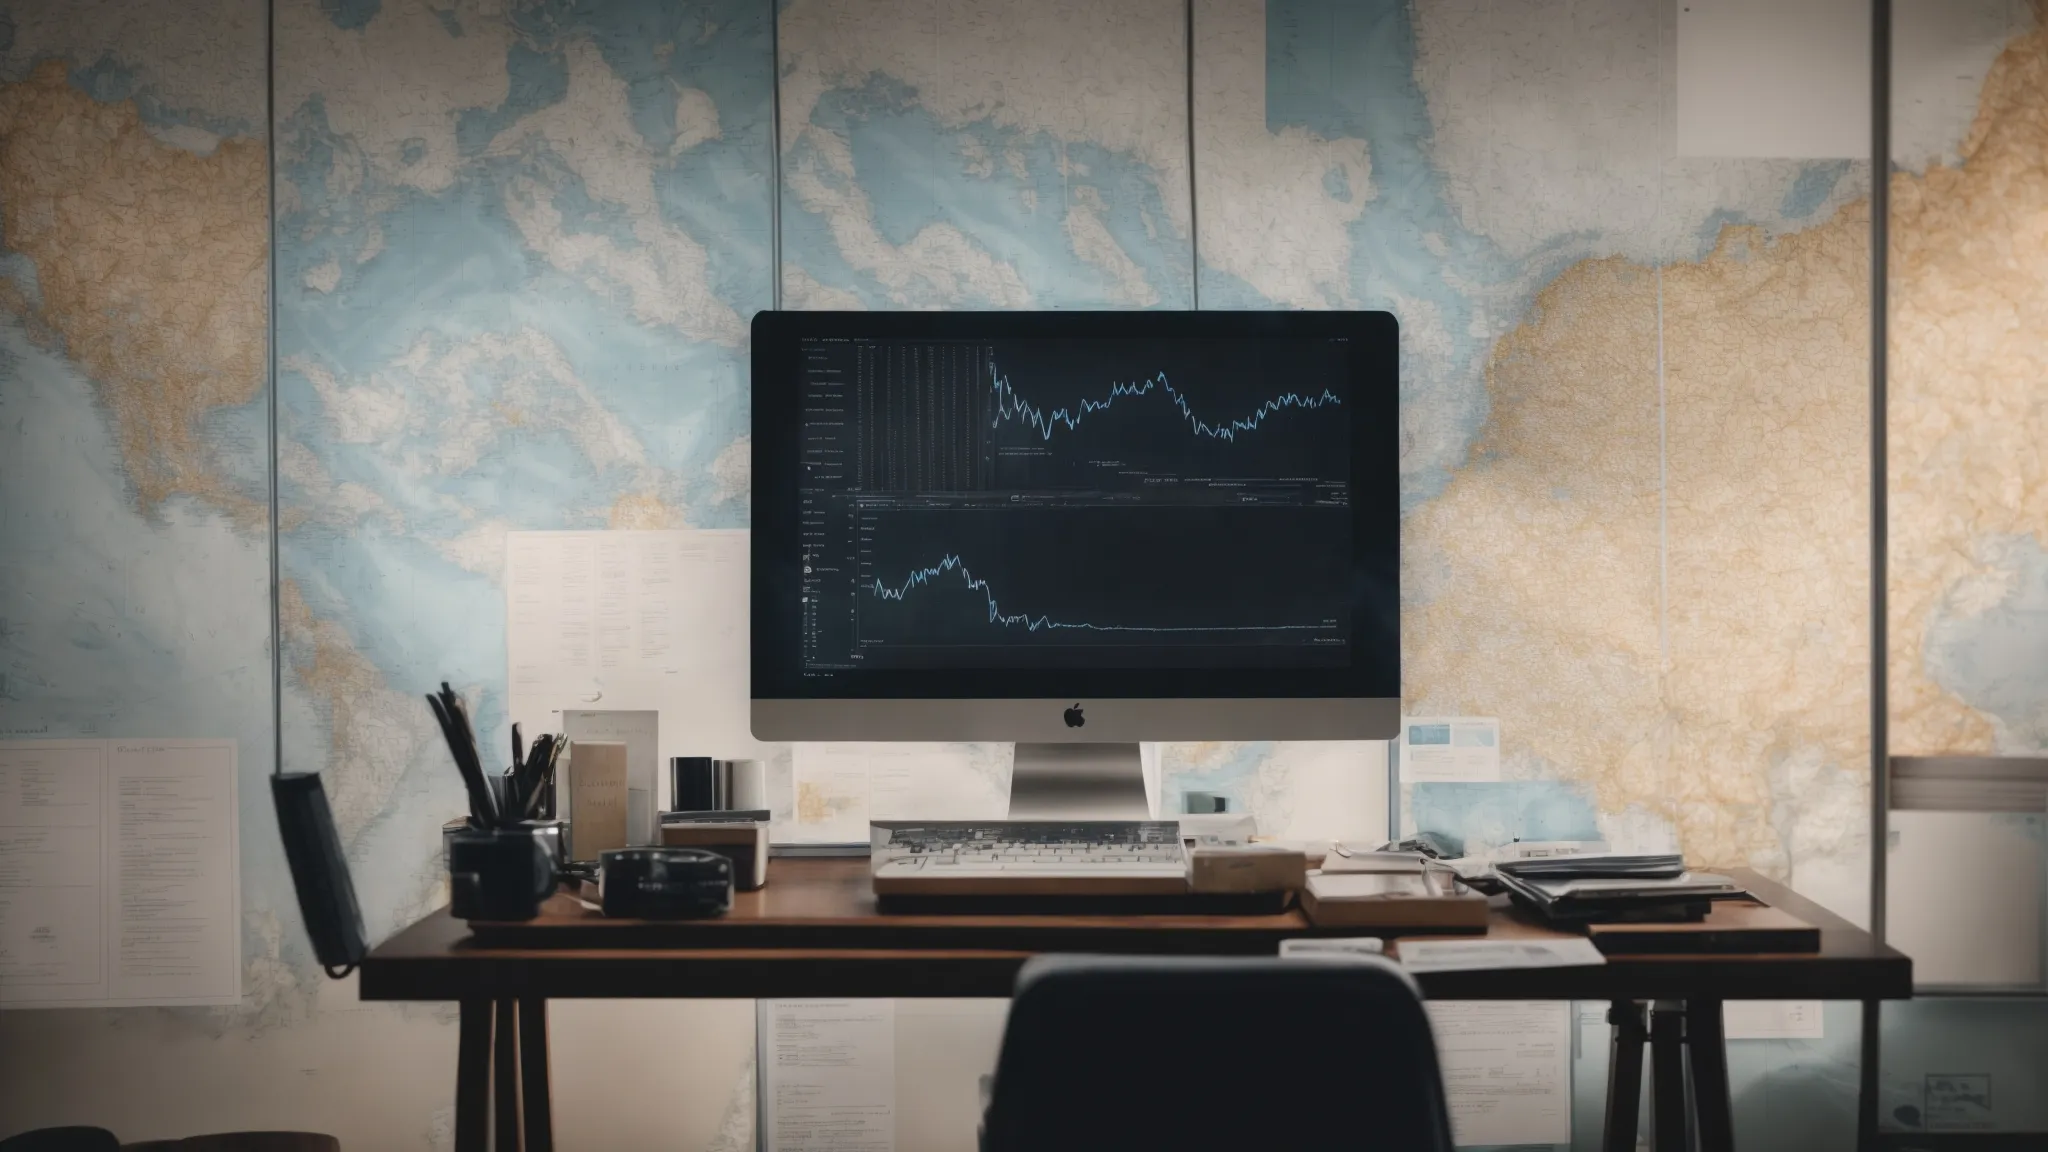 a person sits at a desk surrounded by maps and graphs, analyzing data on a computer screen.